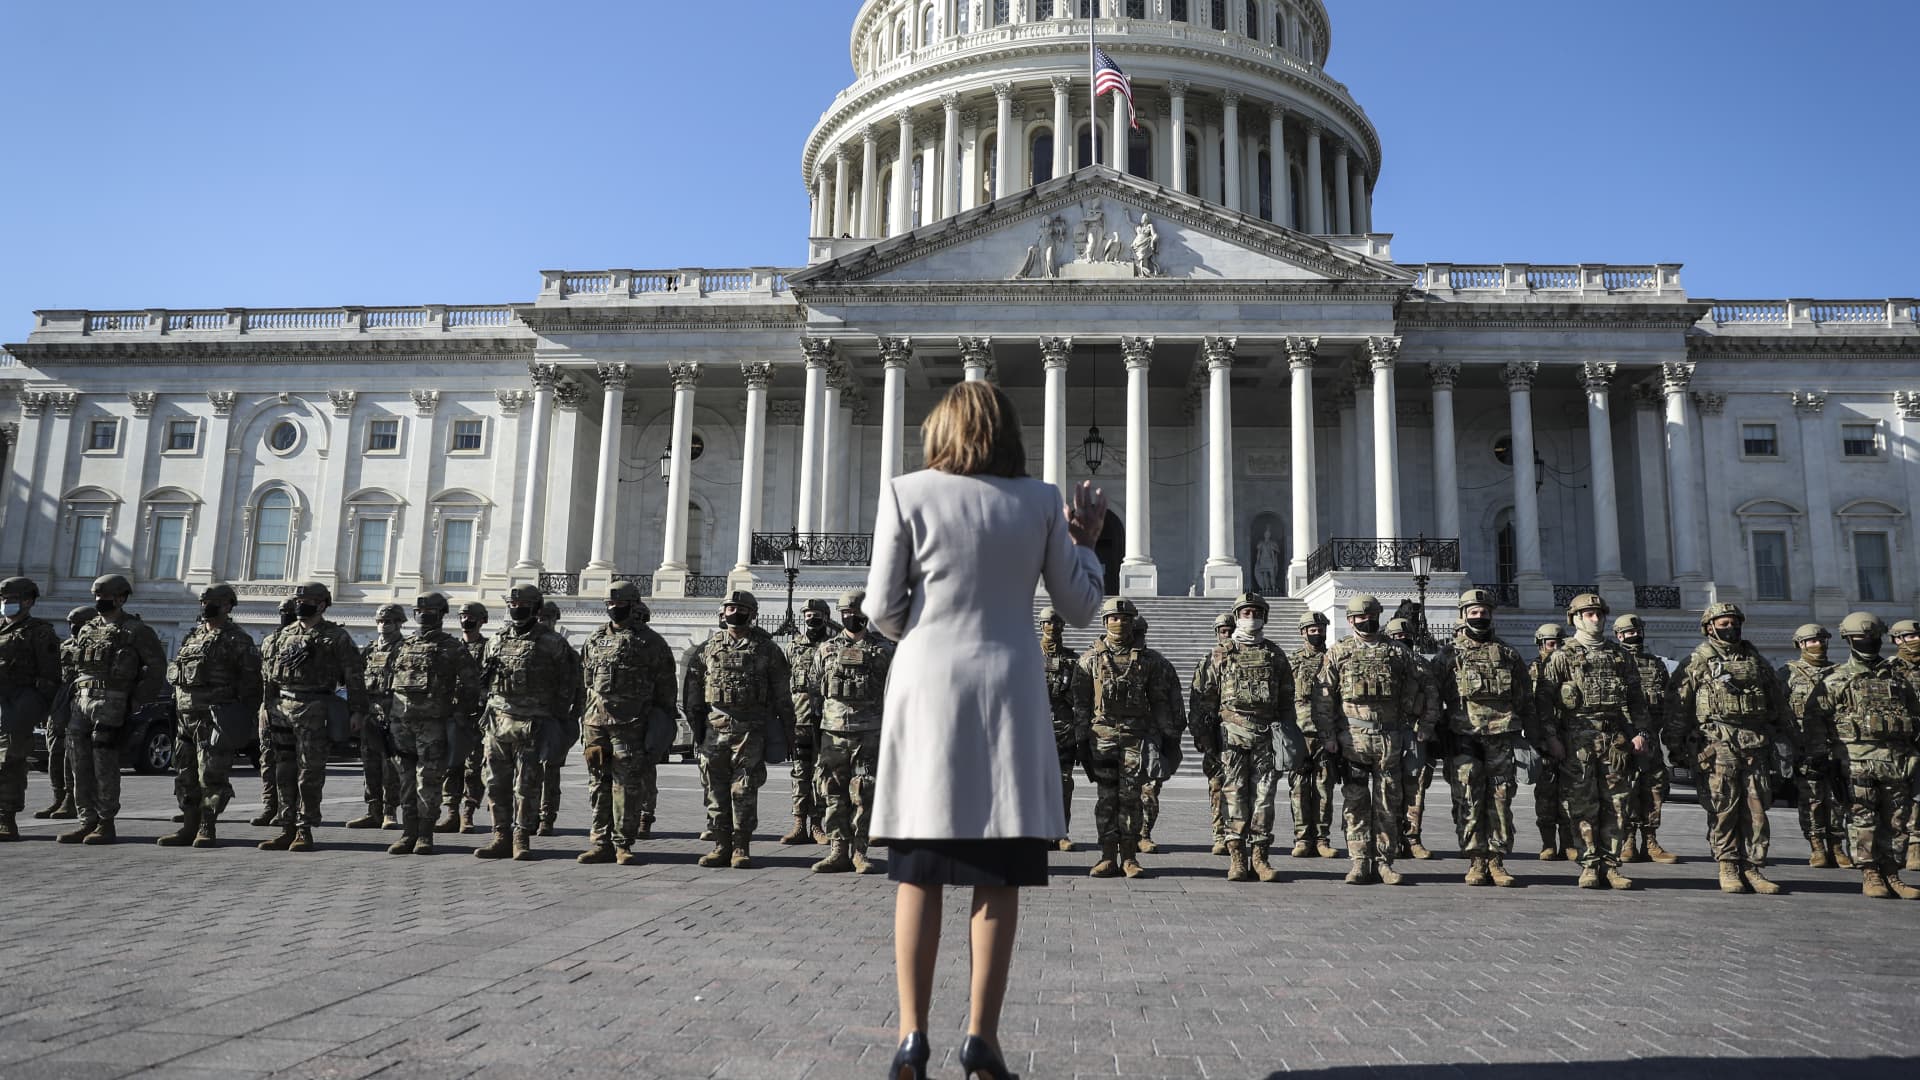 U.S. House Speaker Nancy Pelosi, D-Calif., stands in front of a National Guard troop as she speaks, on the East Entrance of the US Capitol in Washington, DC, on January 13, 2021.